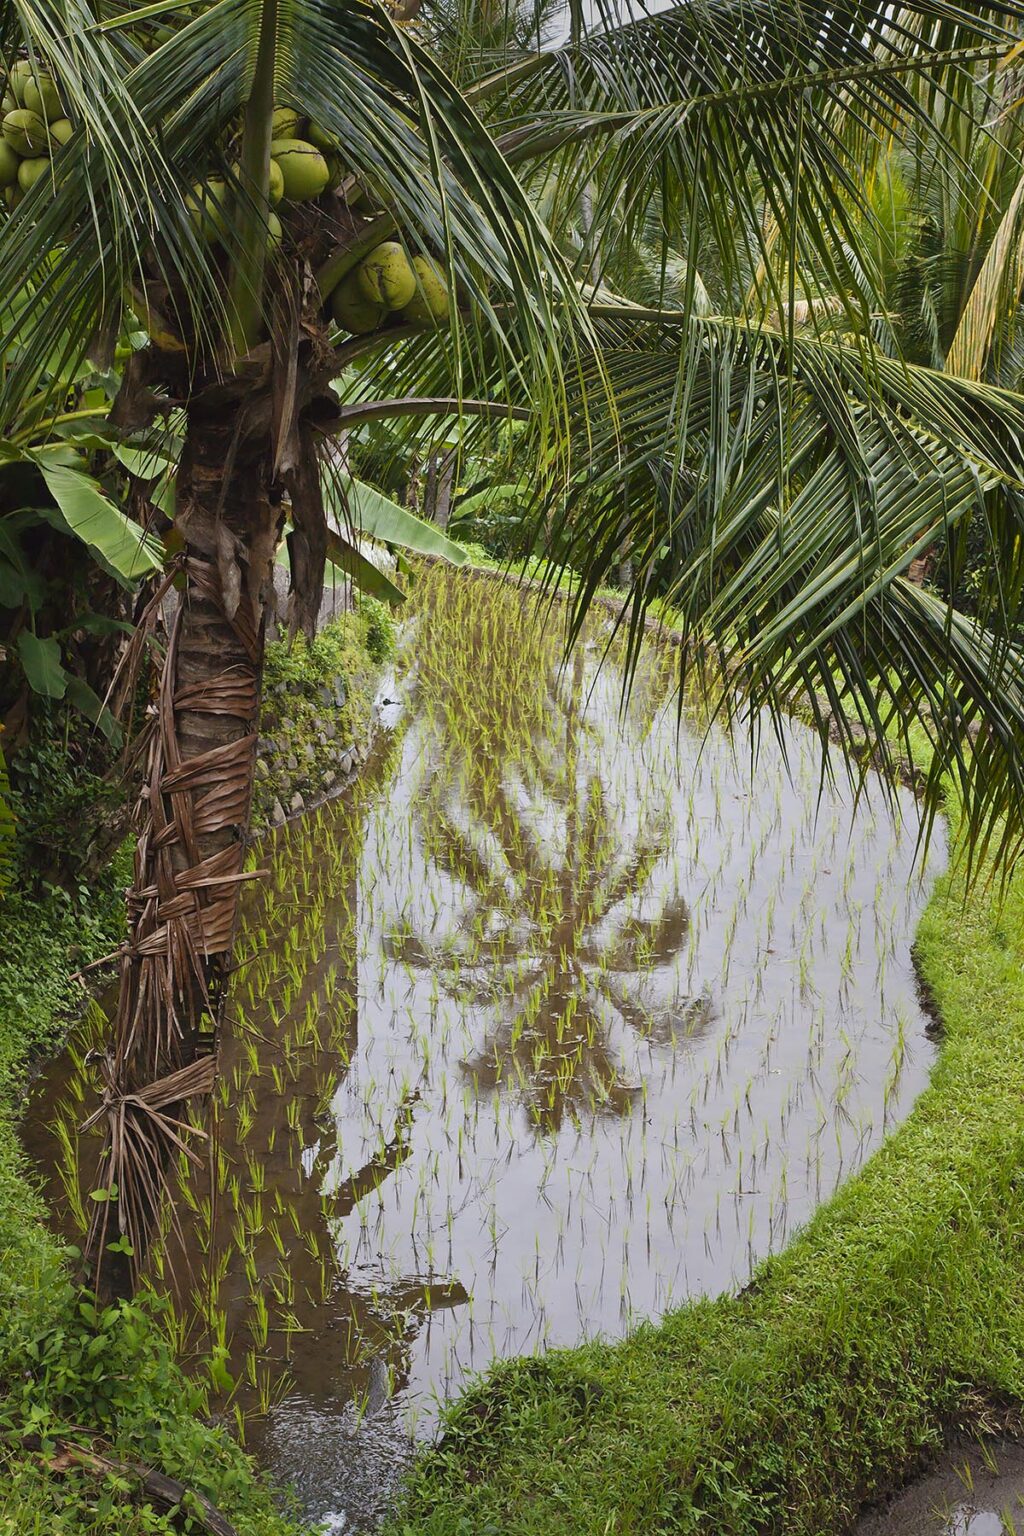 RICE TERRACES and COCONUT TREES are the main crops on the island - BALI, INDONESIA